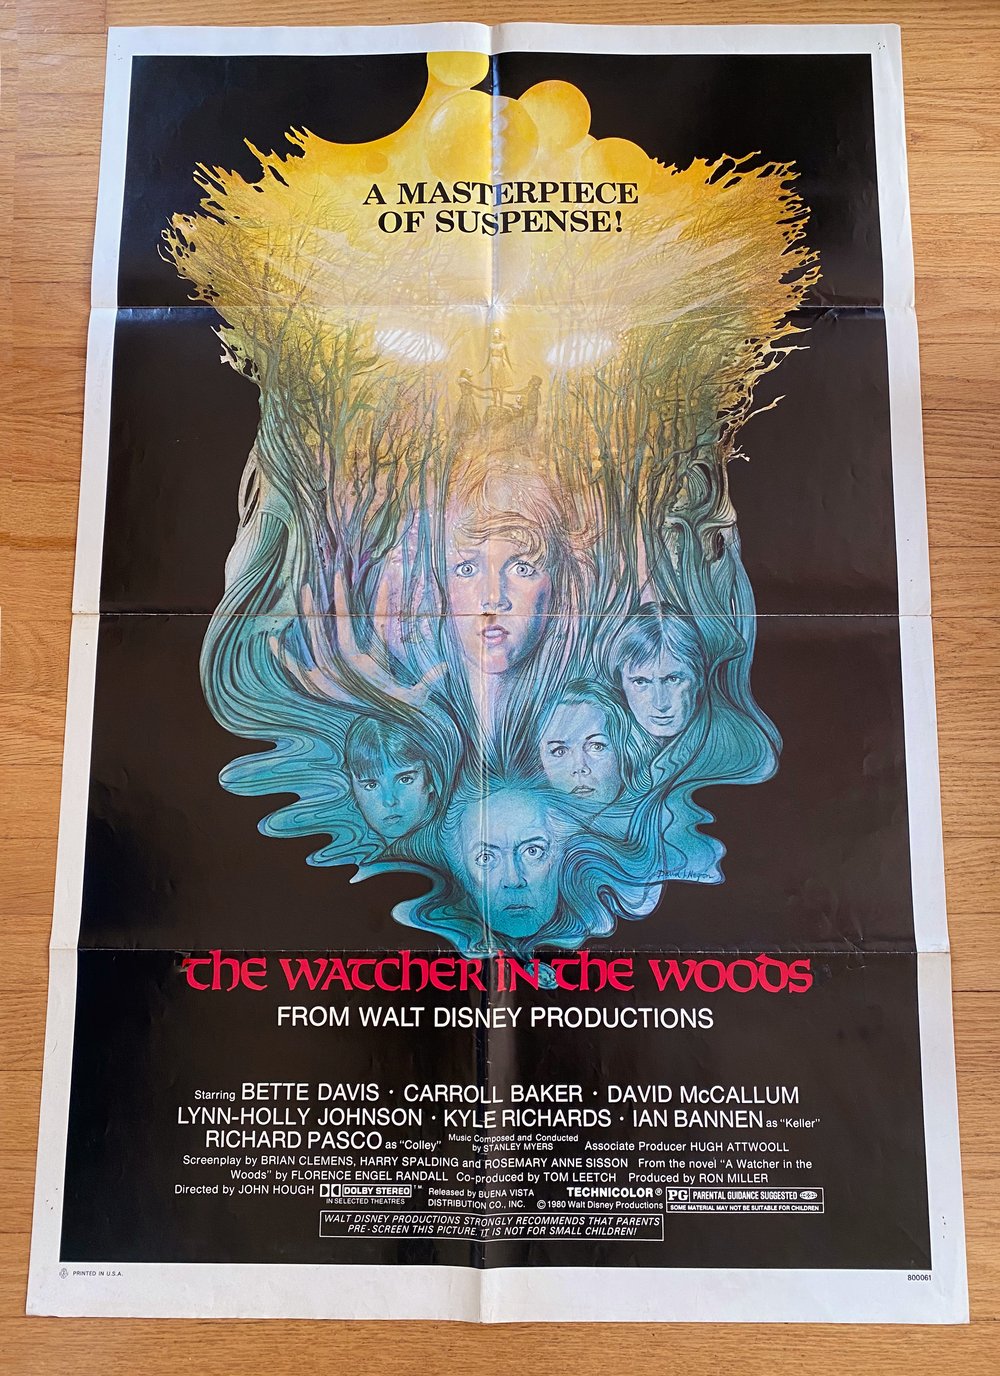 1980 THE WATCHER IN THE WOODS Original U.S. One Sheet Movie Poster